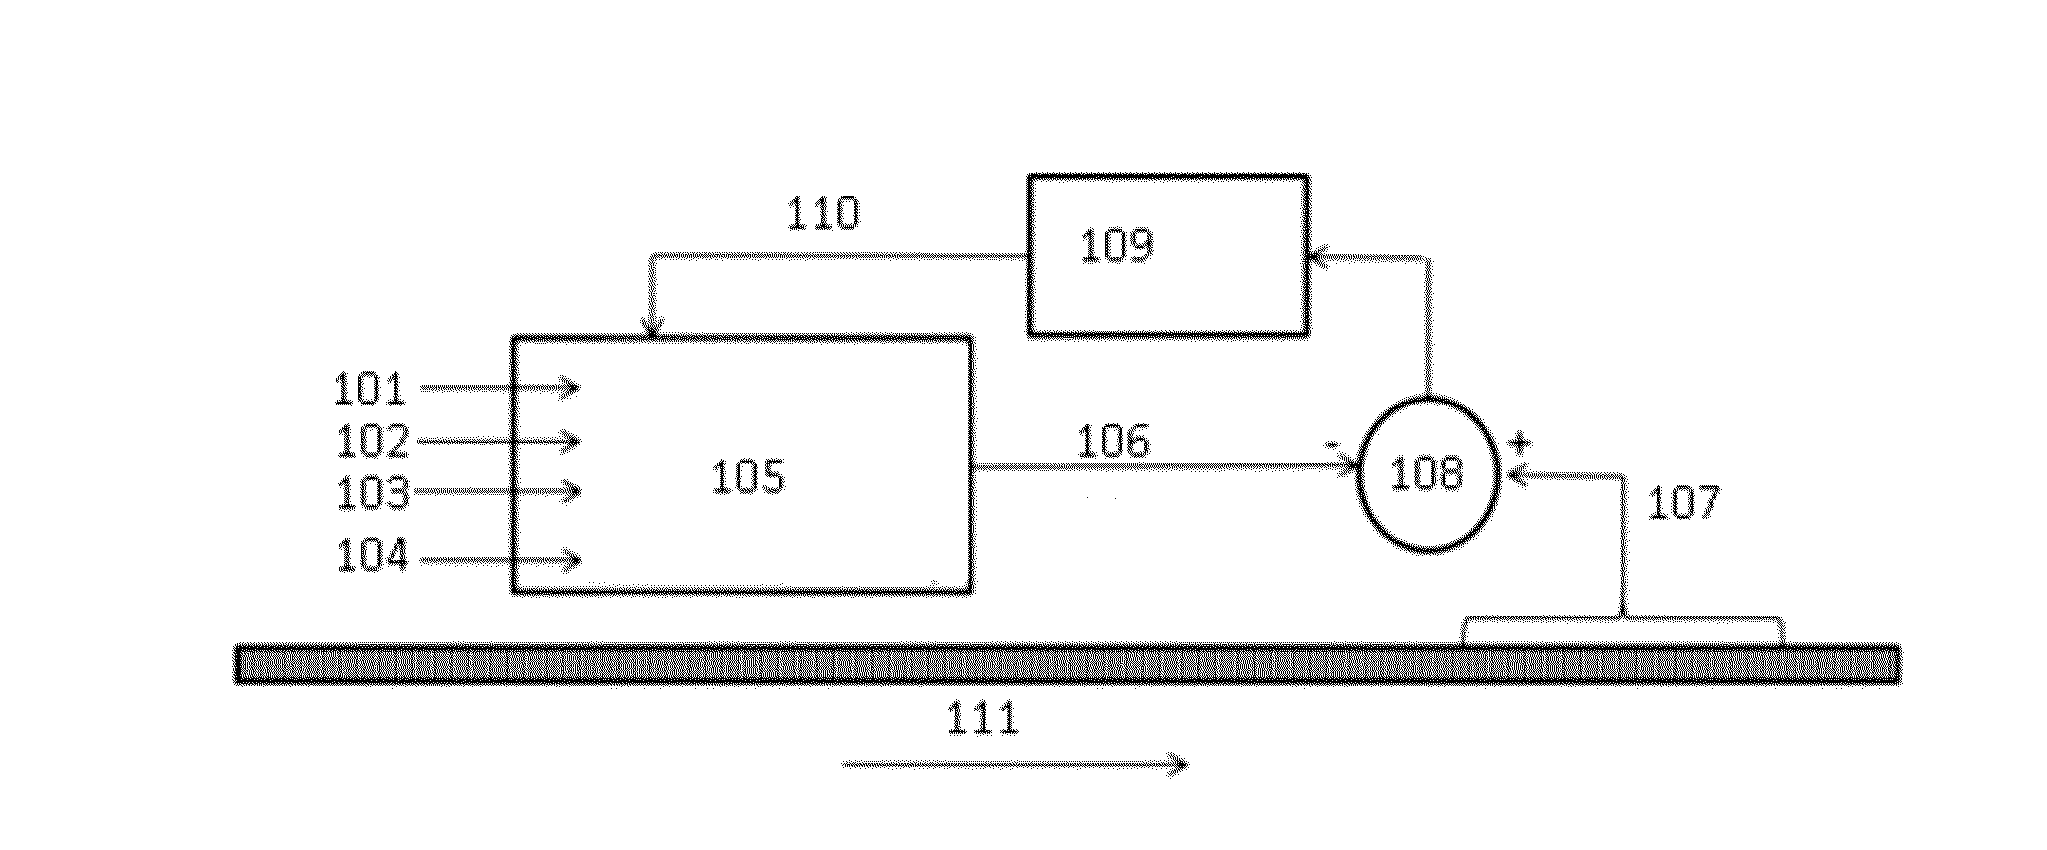 Precision dialysis monitoring and synchonization system